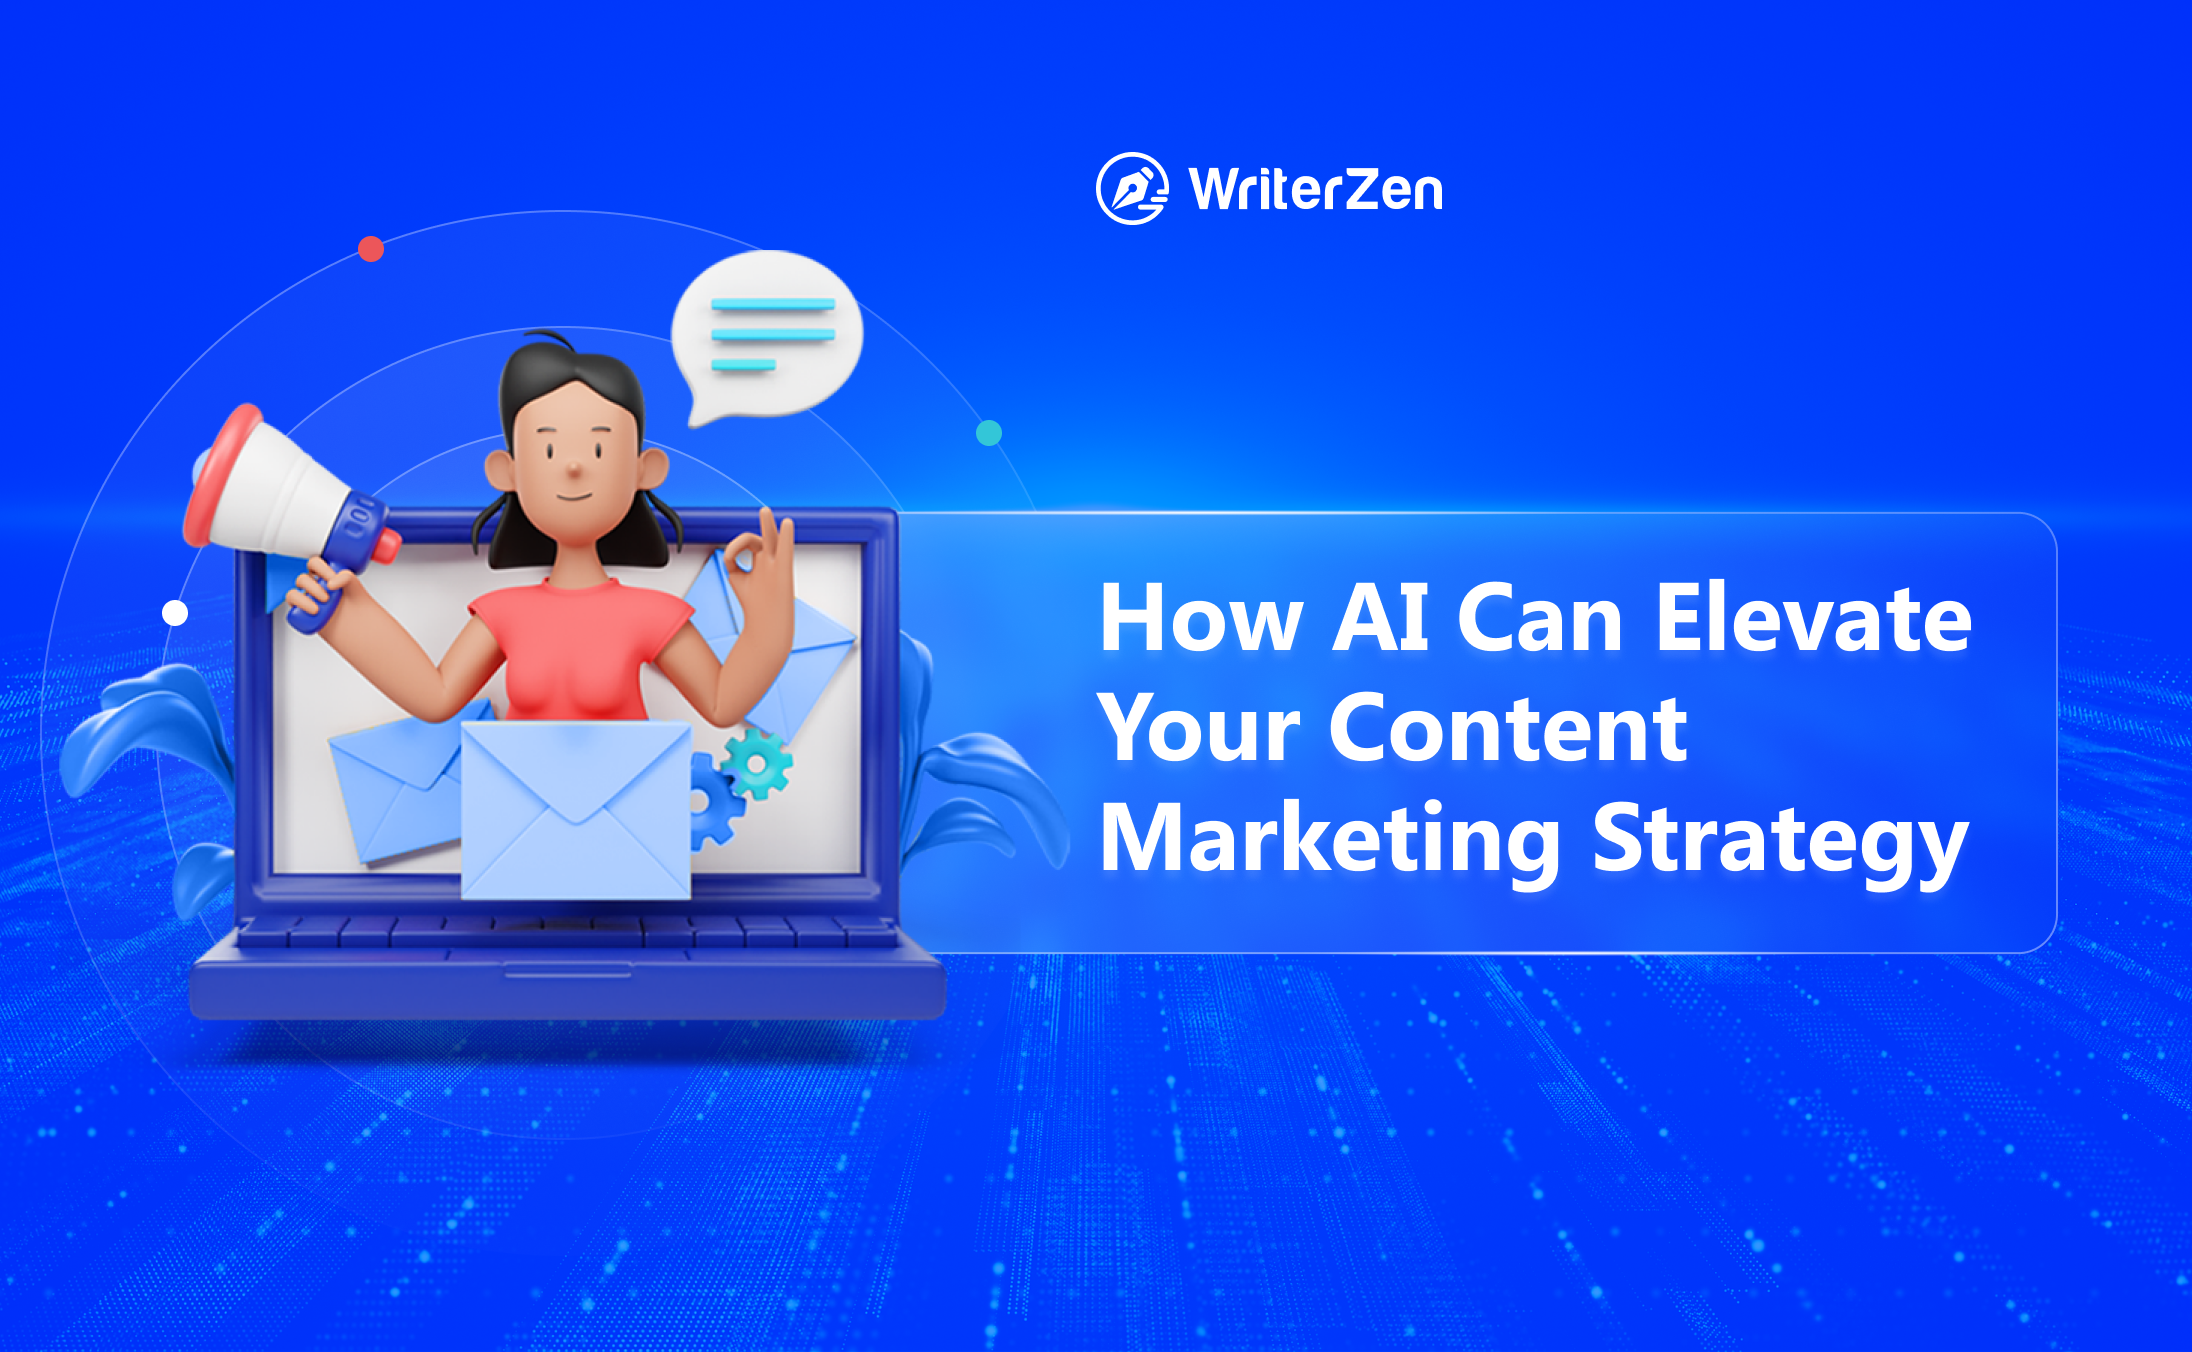 How AI Can Elevate Your Content Marketing Strategy